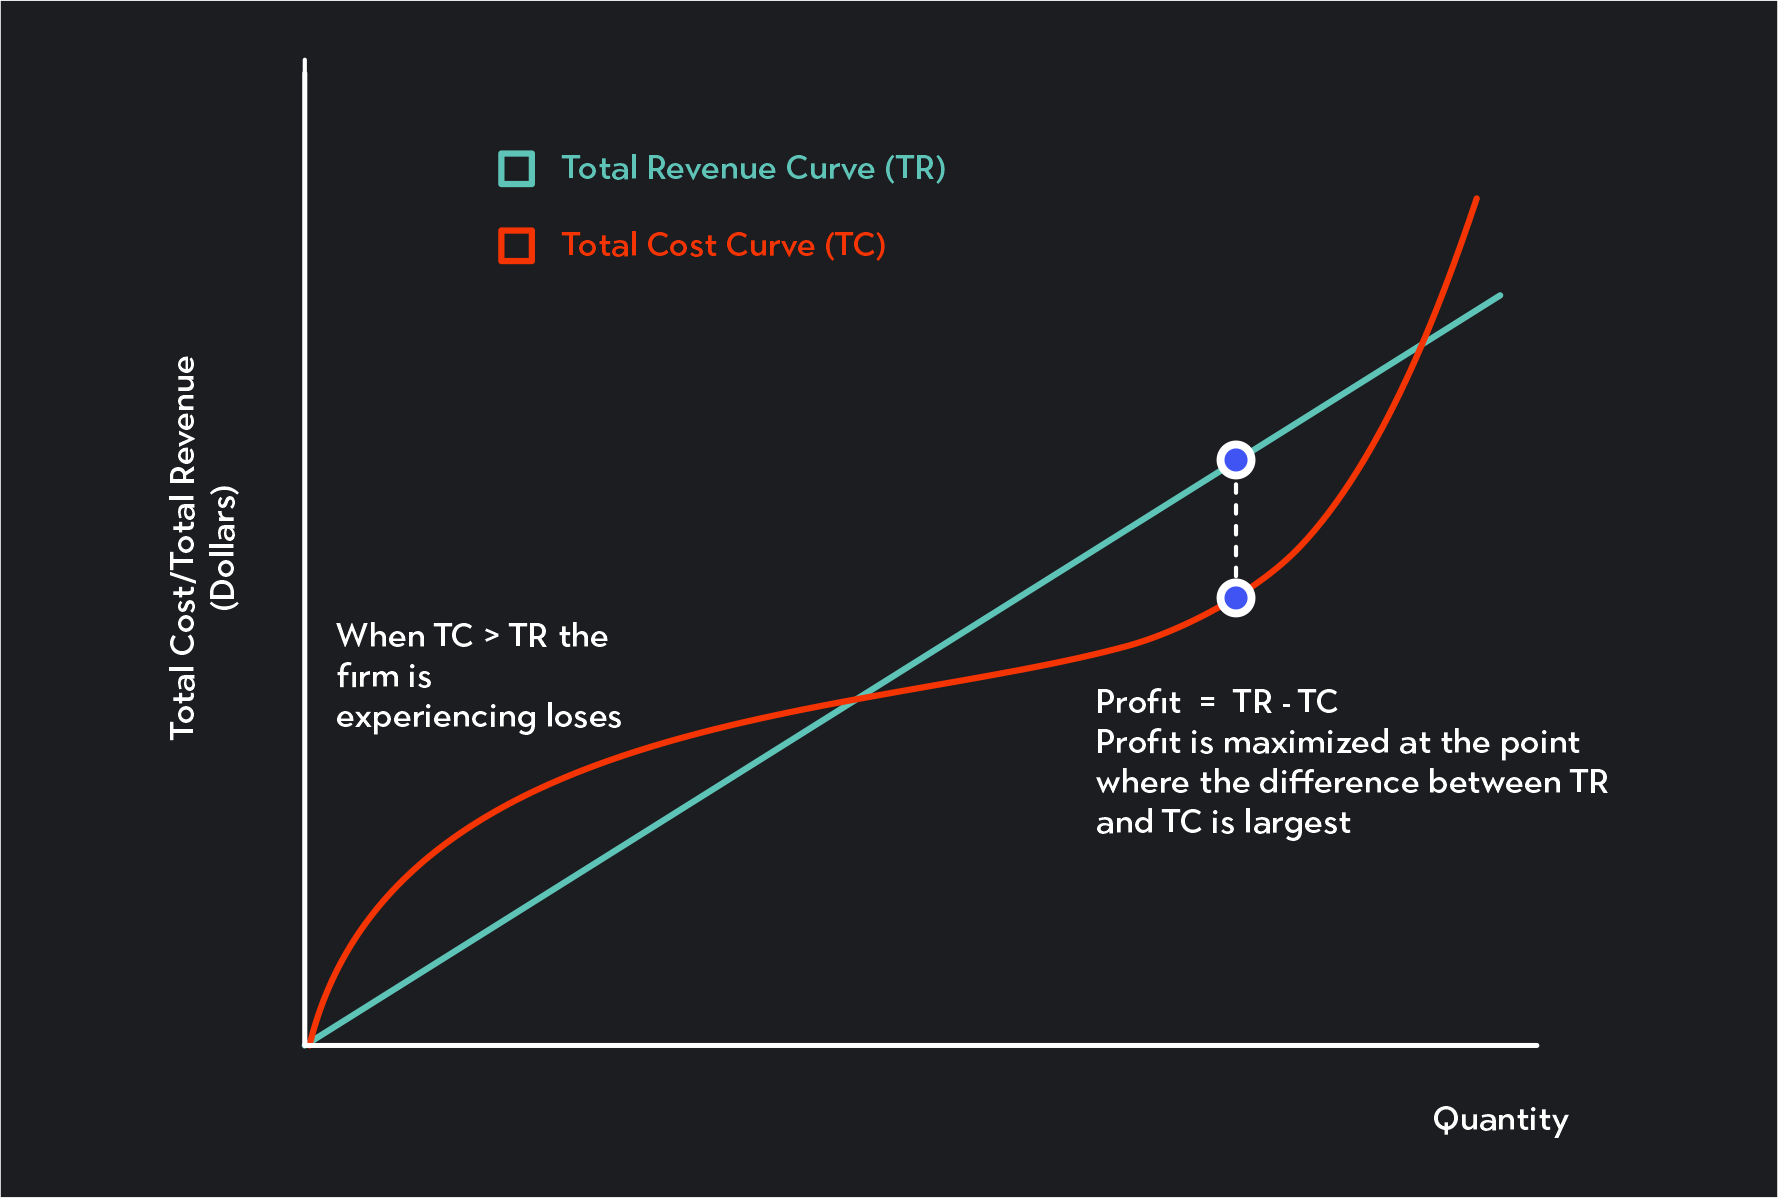 A firm’s total cost curve and total revenue